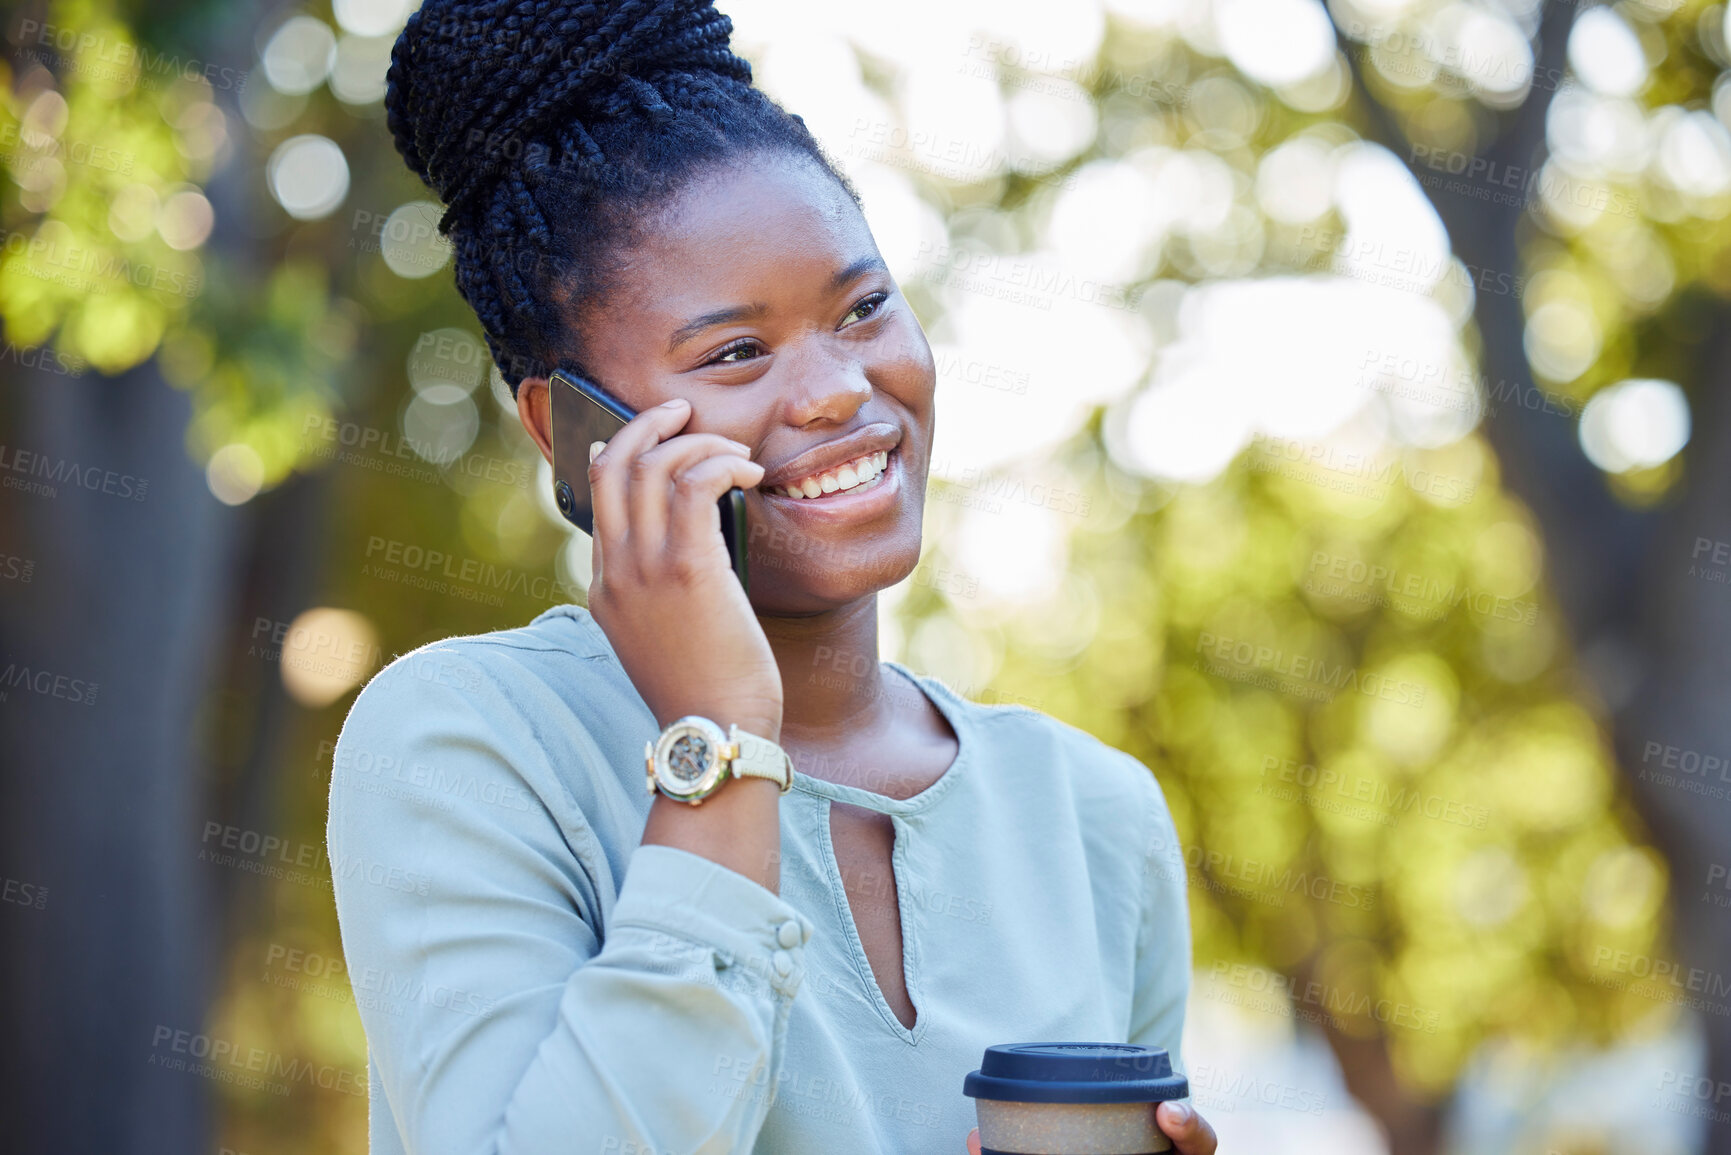 Buy stock photo Black woman smile, phone communication and morning outdoor with blurred background and laughing. Happy, networking and business employee on a work break on mobile conversation and discussion by trees